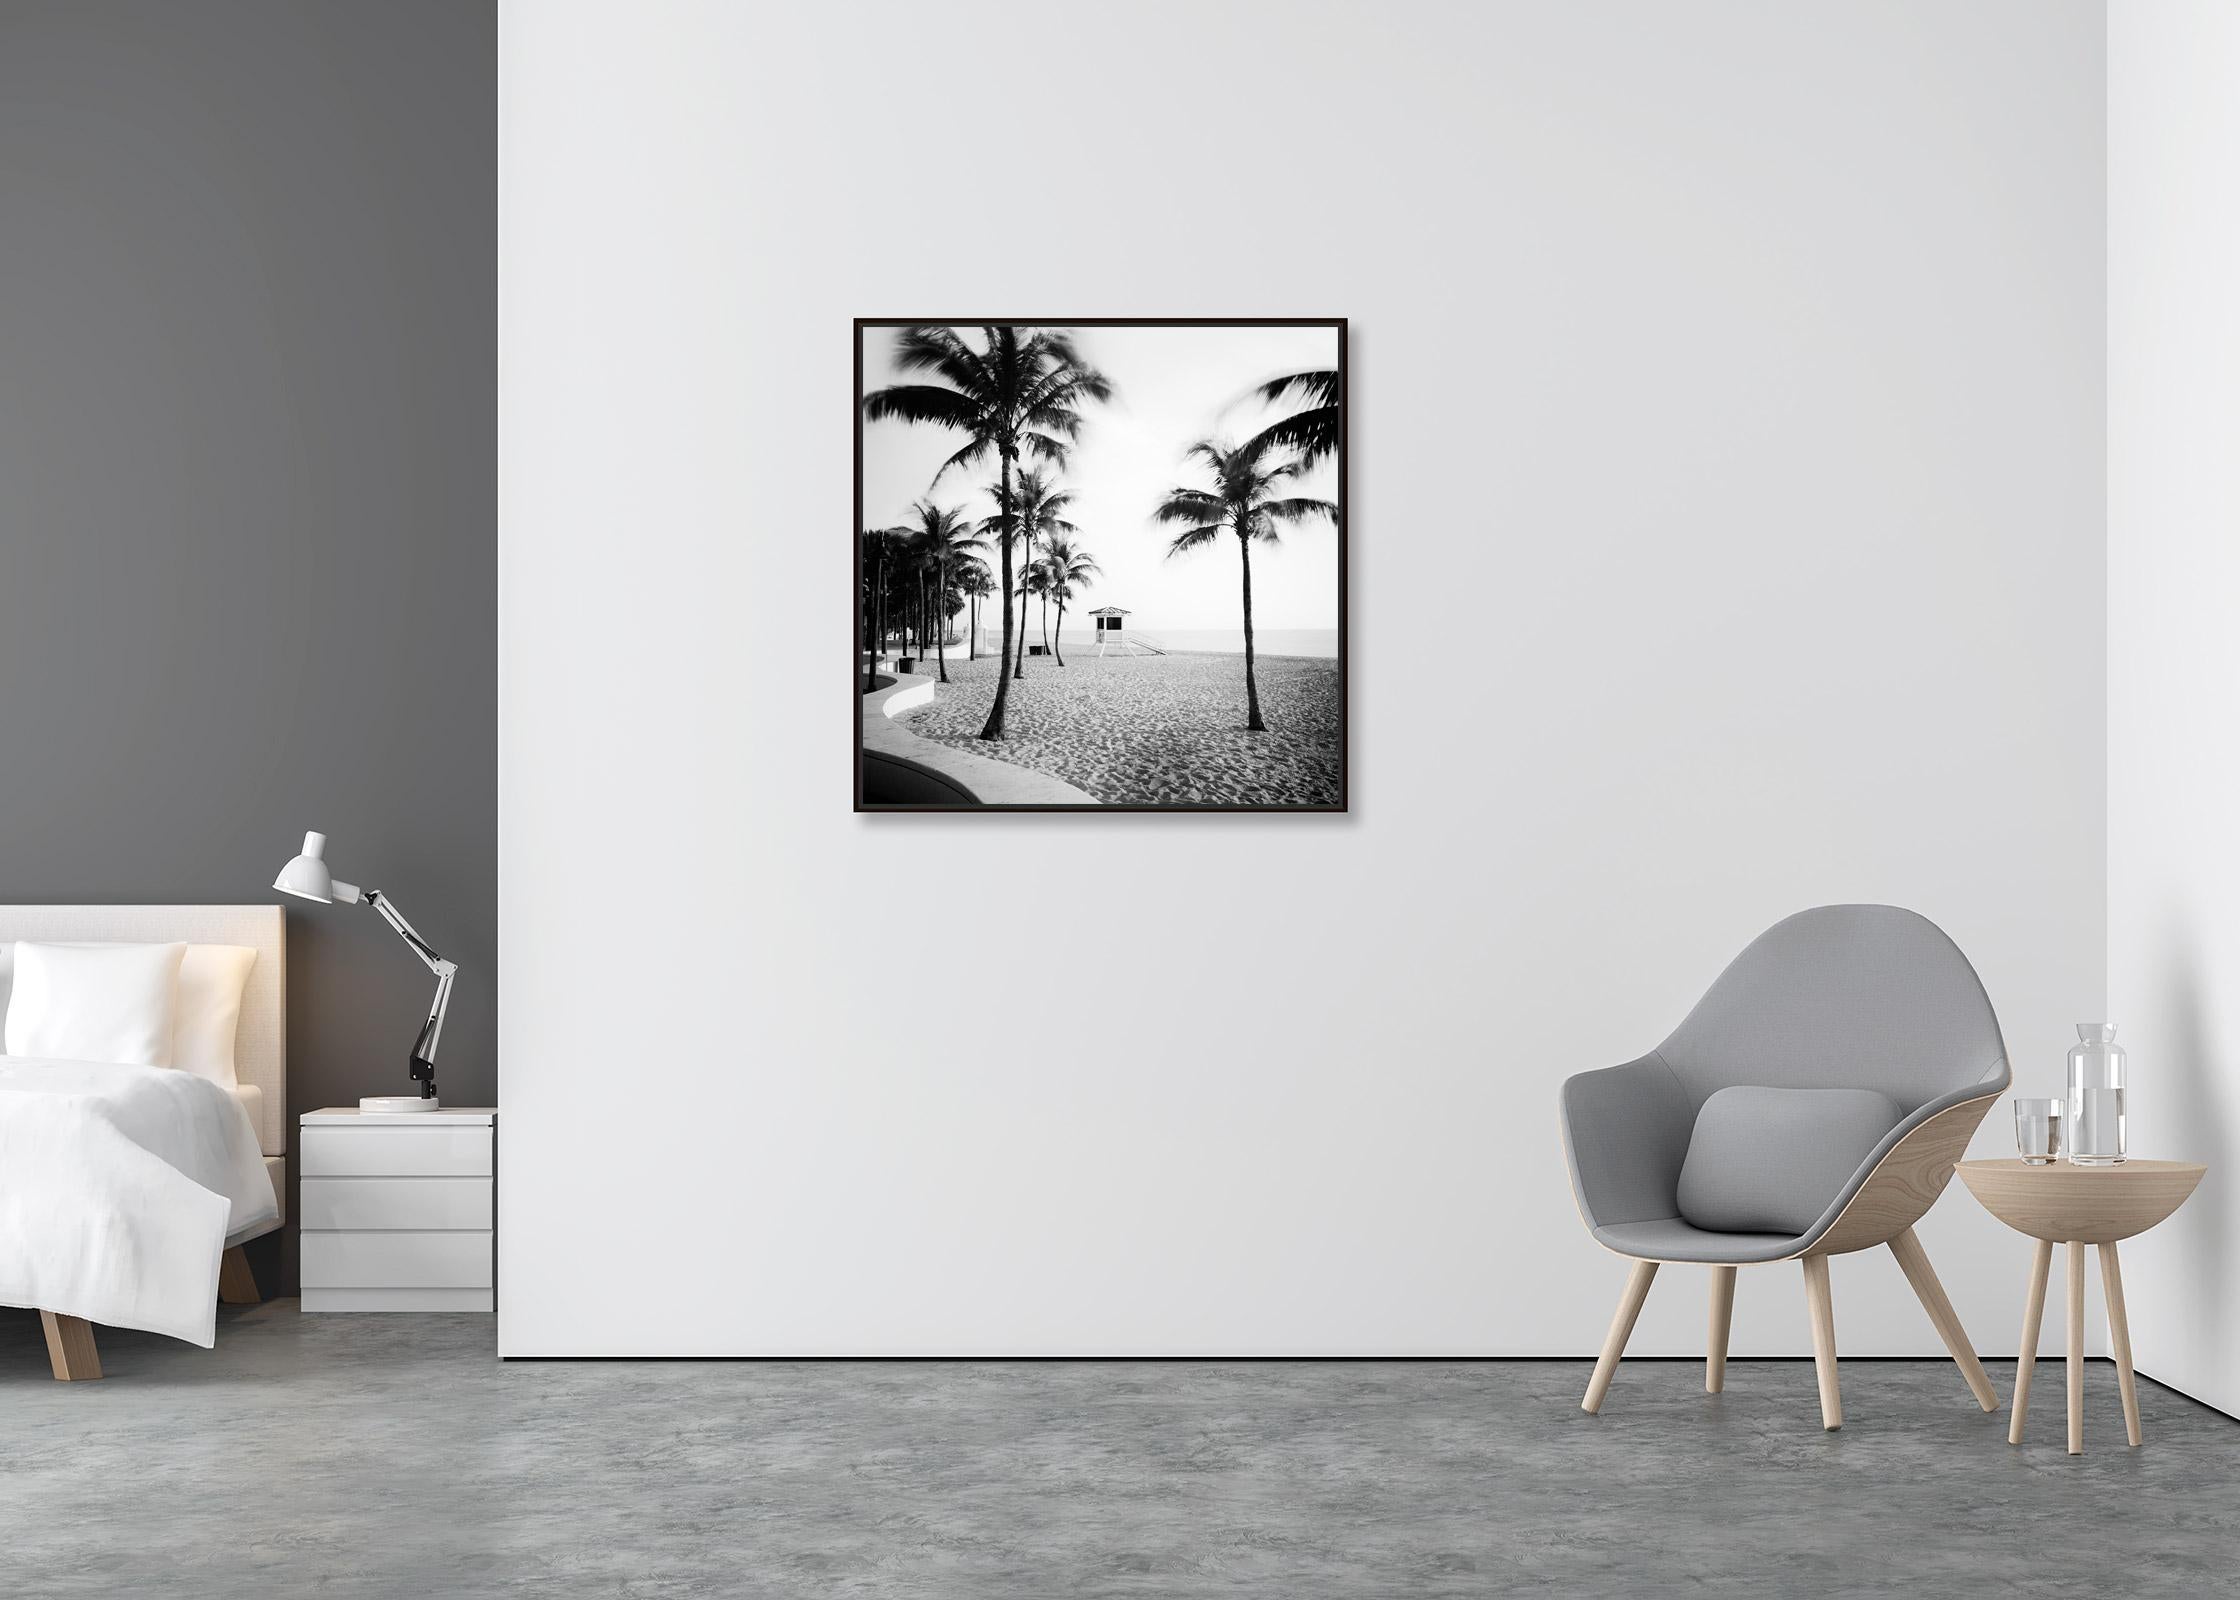 Fort Lauderdale Beach, Palm Tree, Florida, black and white landscape photography - Contemporary Photograph by Gerald Berghammer